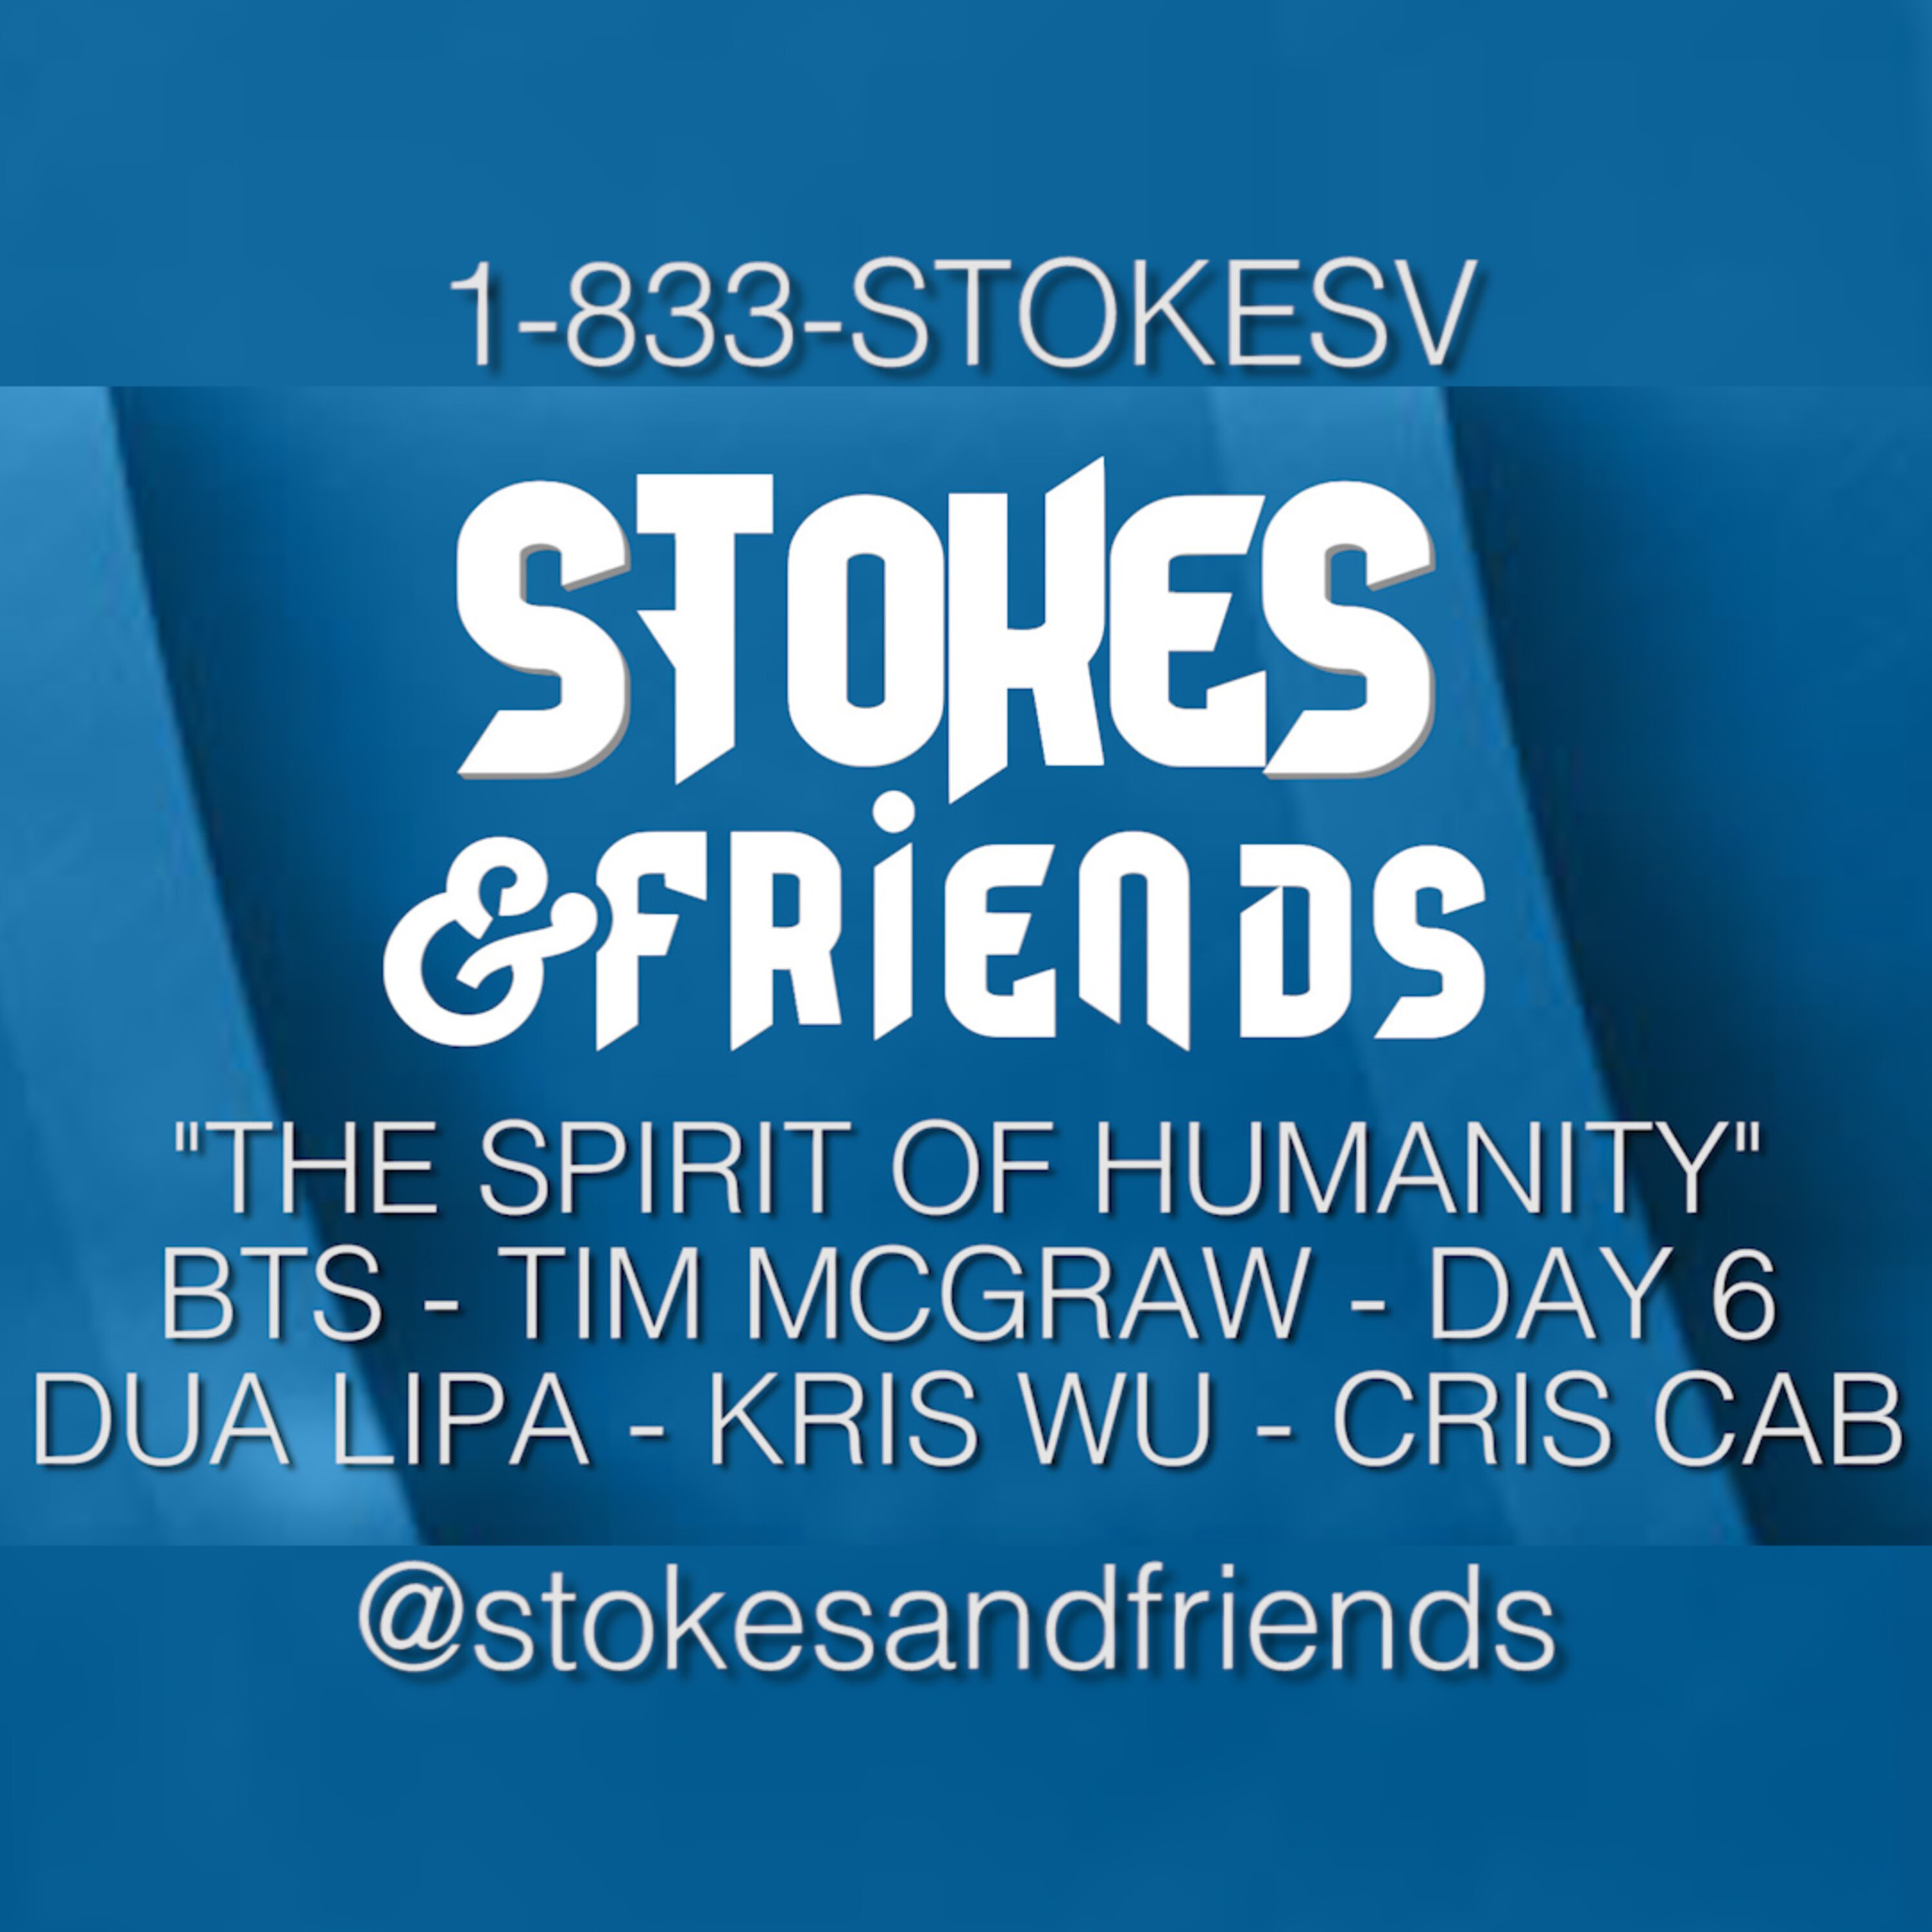 STOKES & FRIENDS PRESENT ”THE SPIRIT OF HUMANITY”